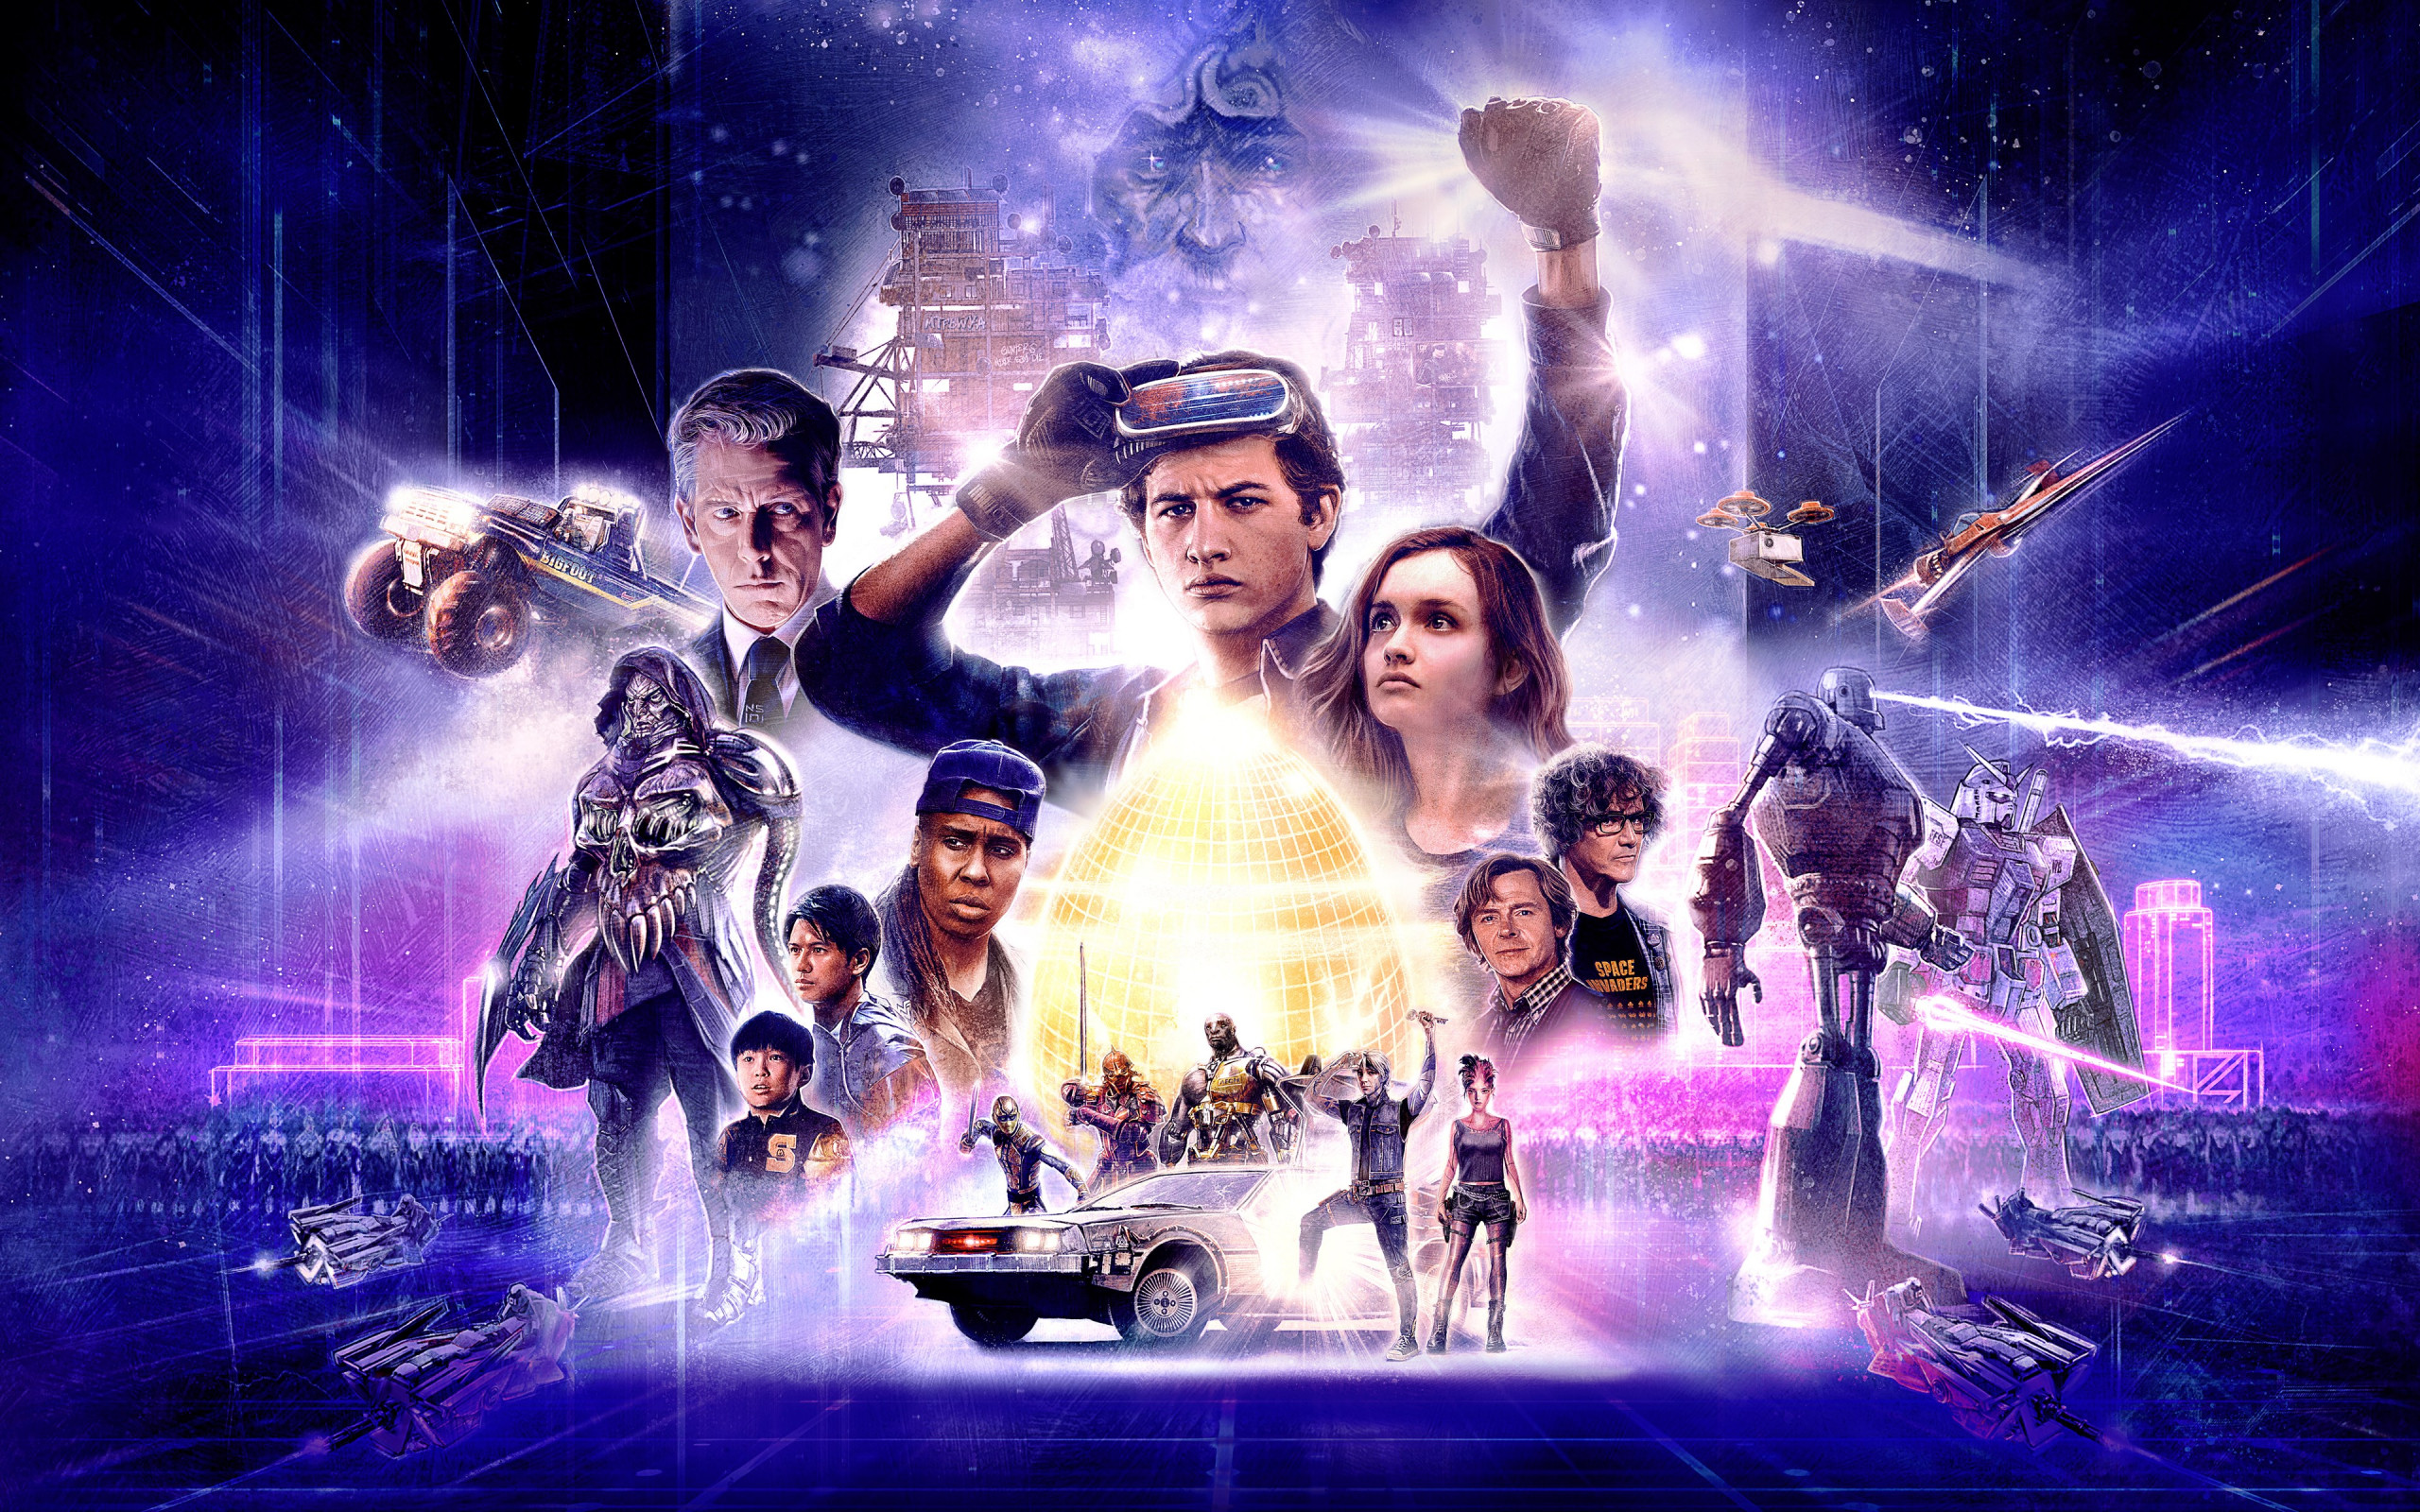 Ready Player One poster wallpaper 2560x1600